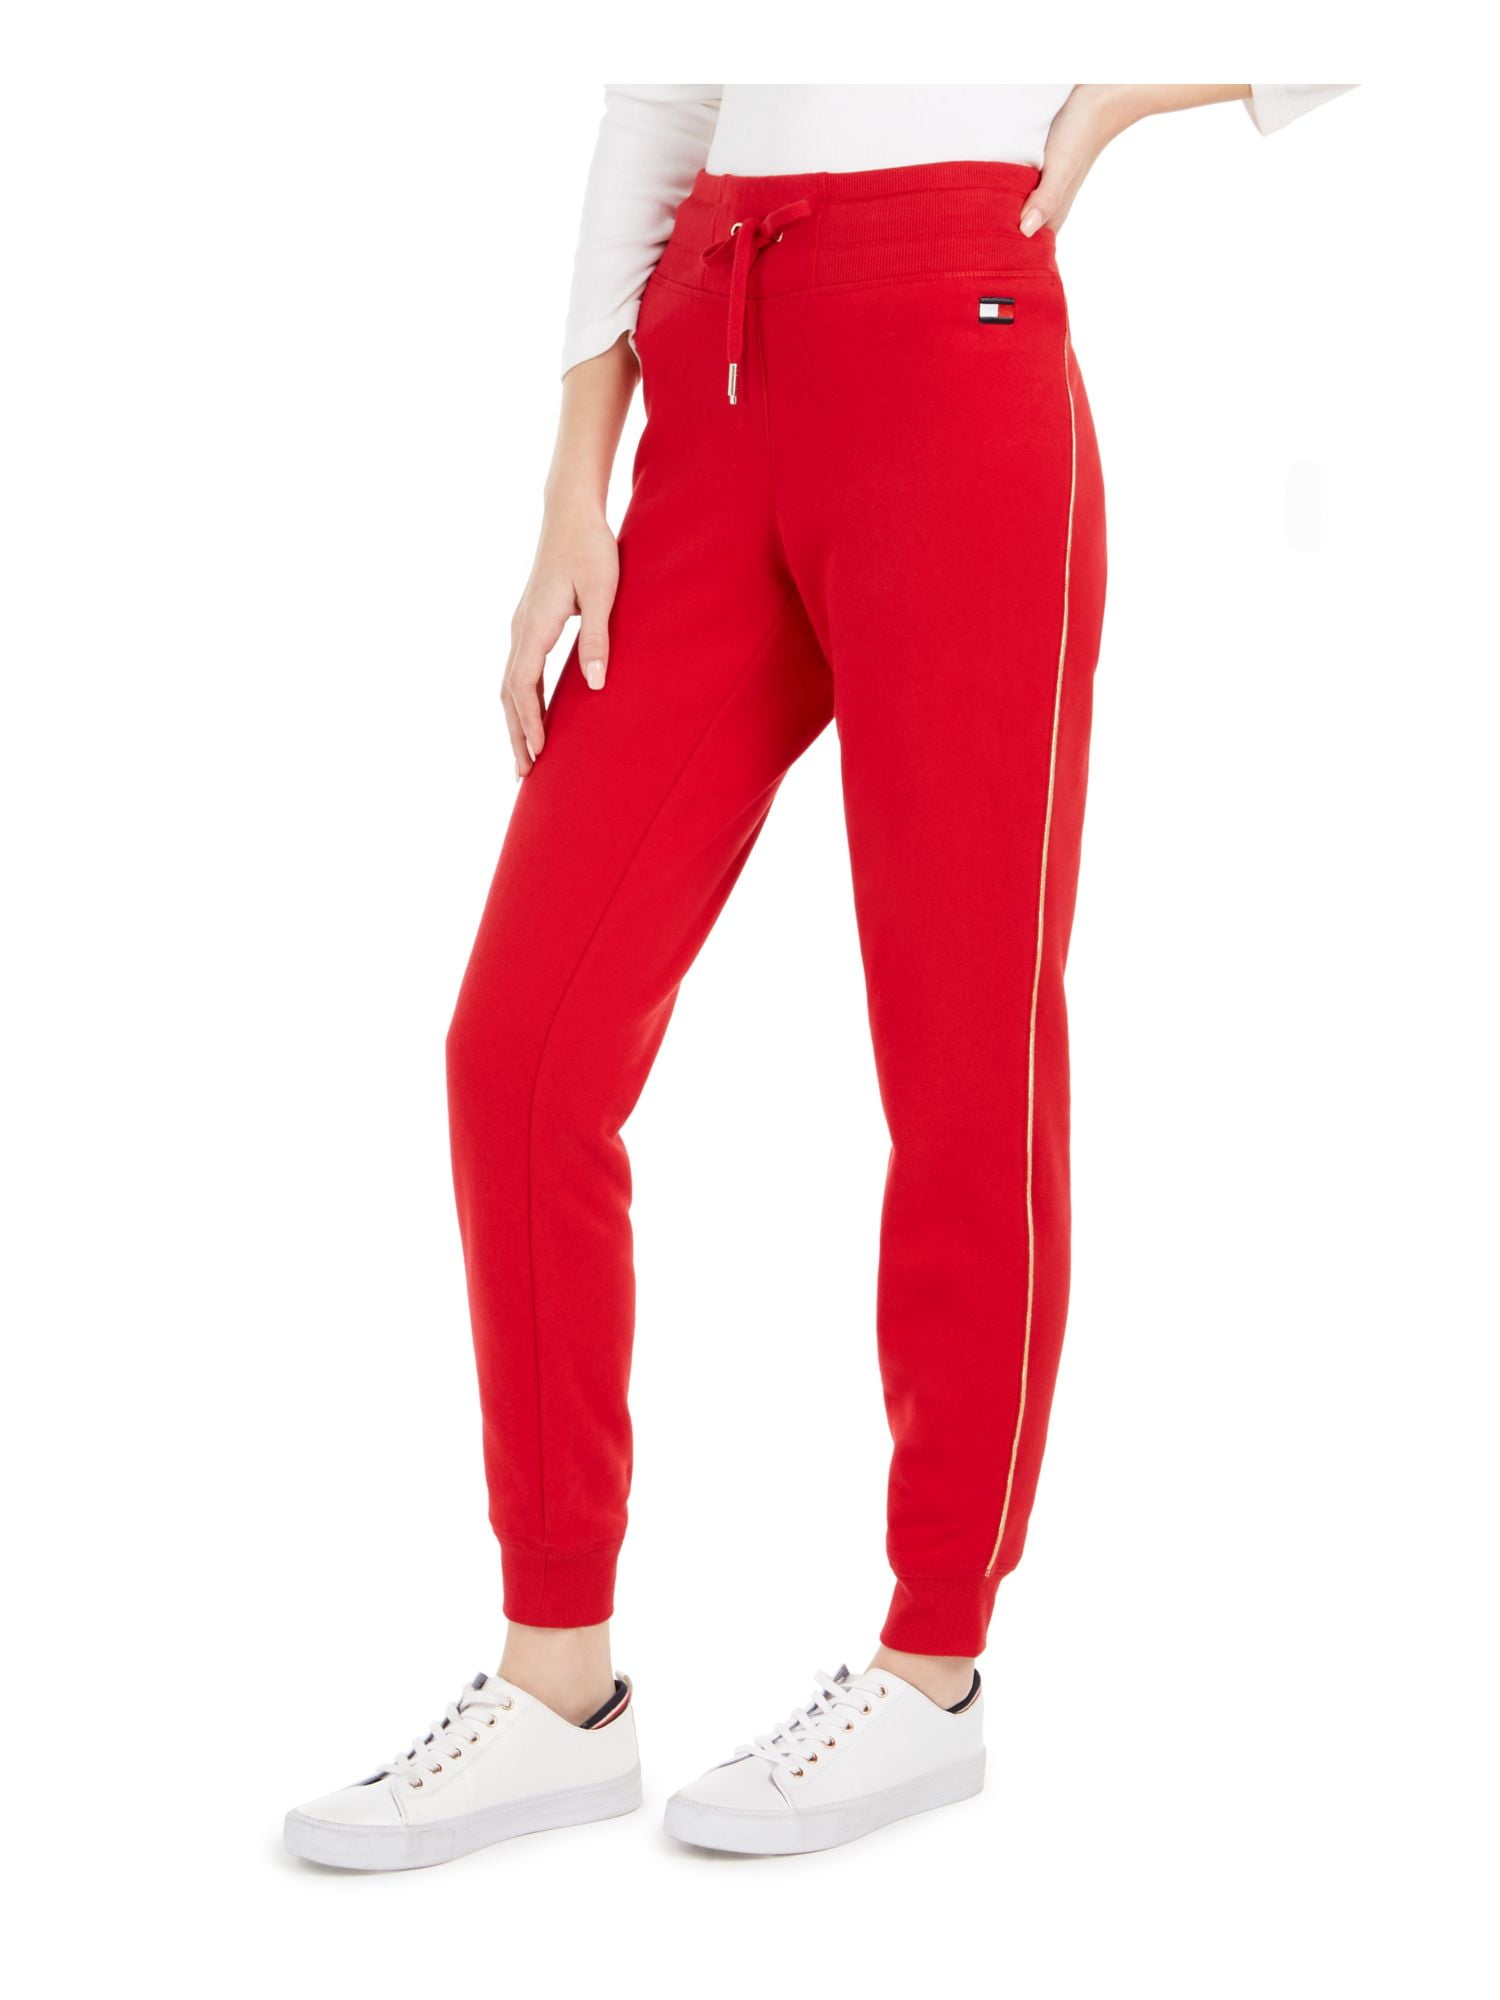 TOMMY HILFIGER Womens Red Pants Size M 